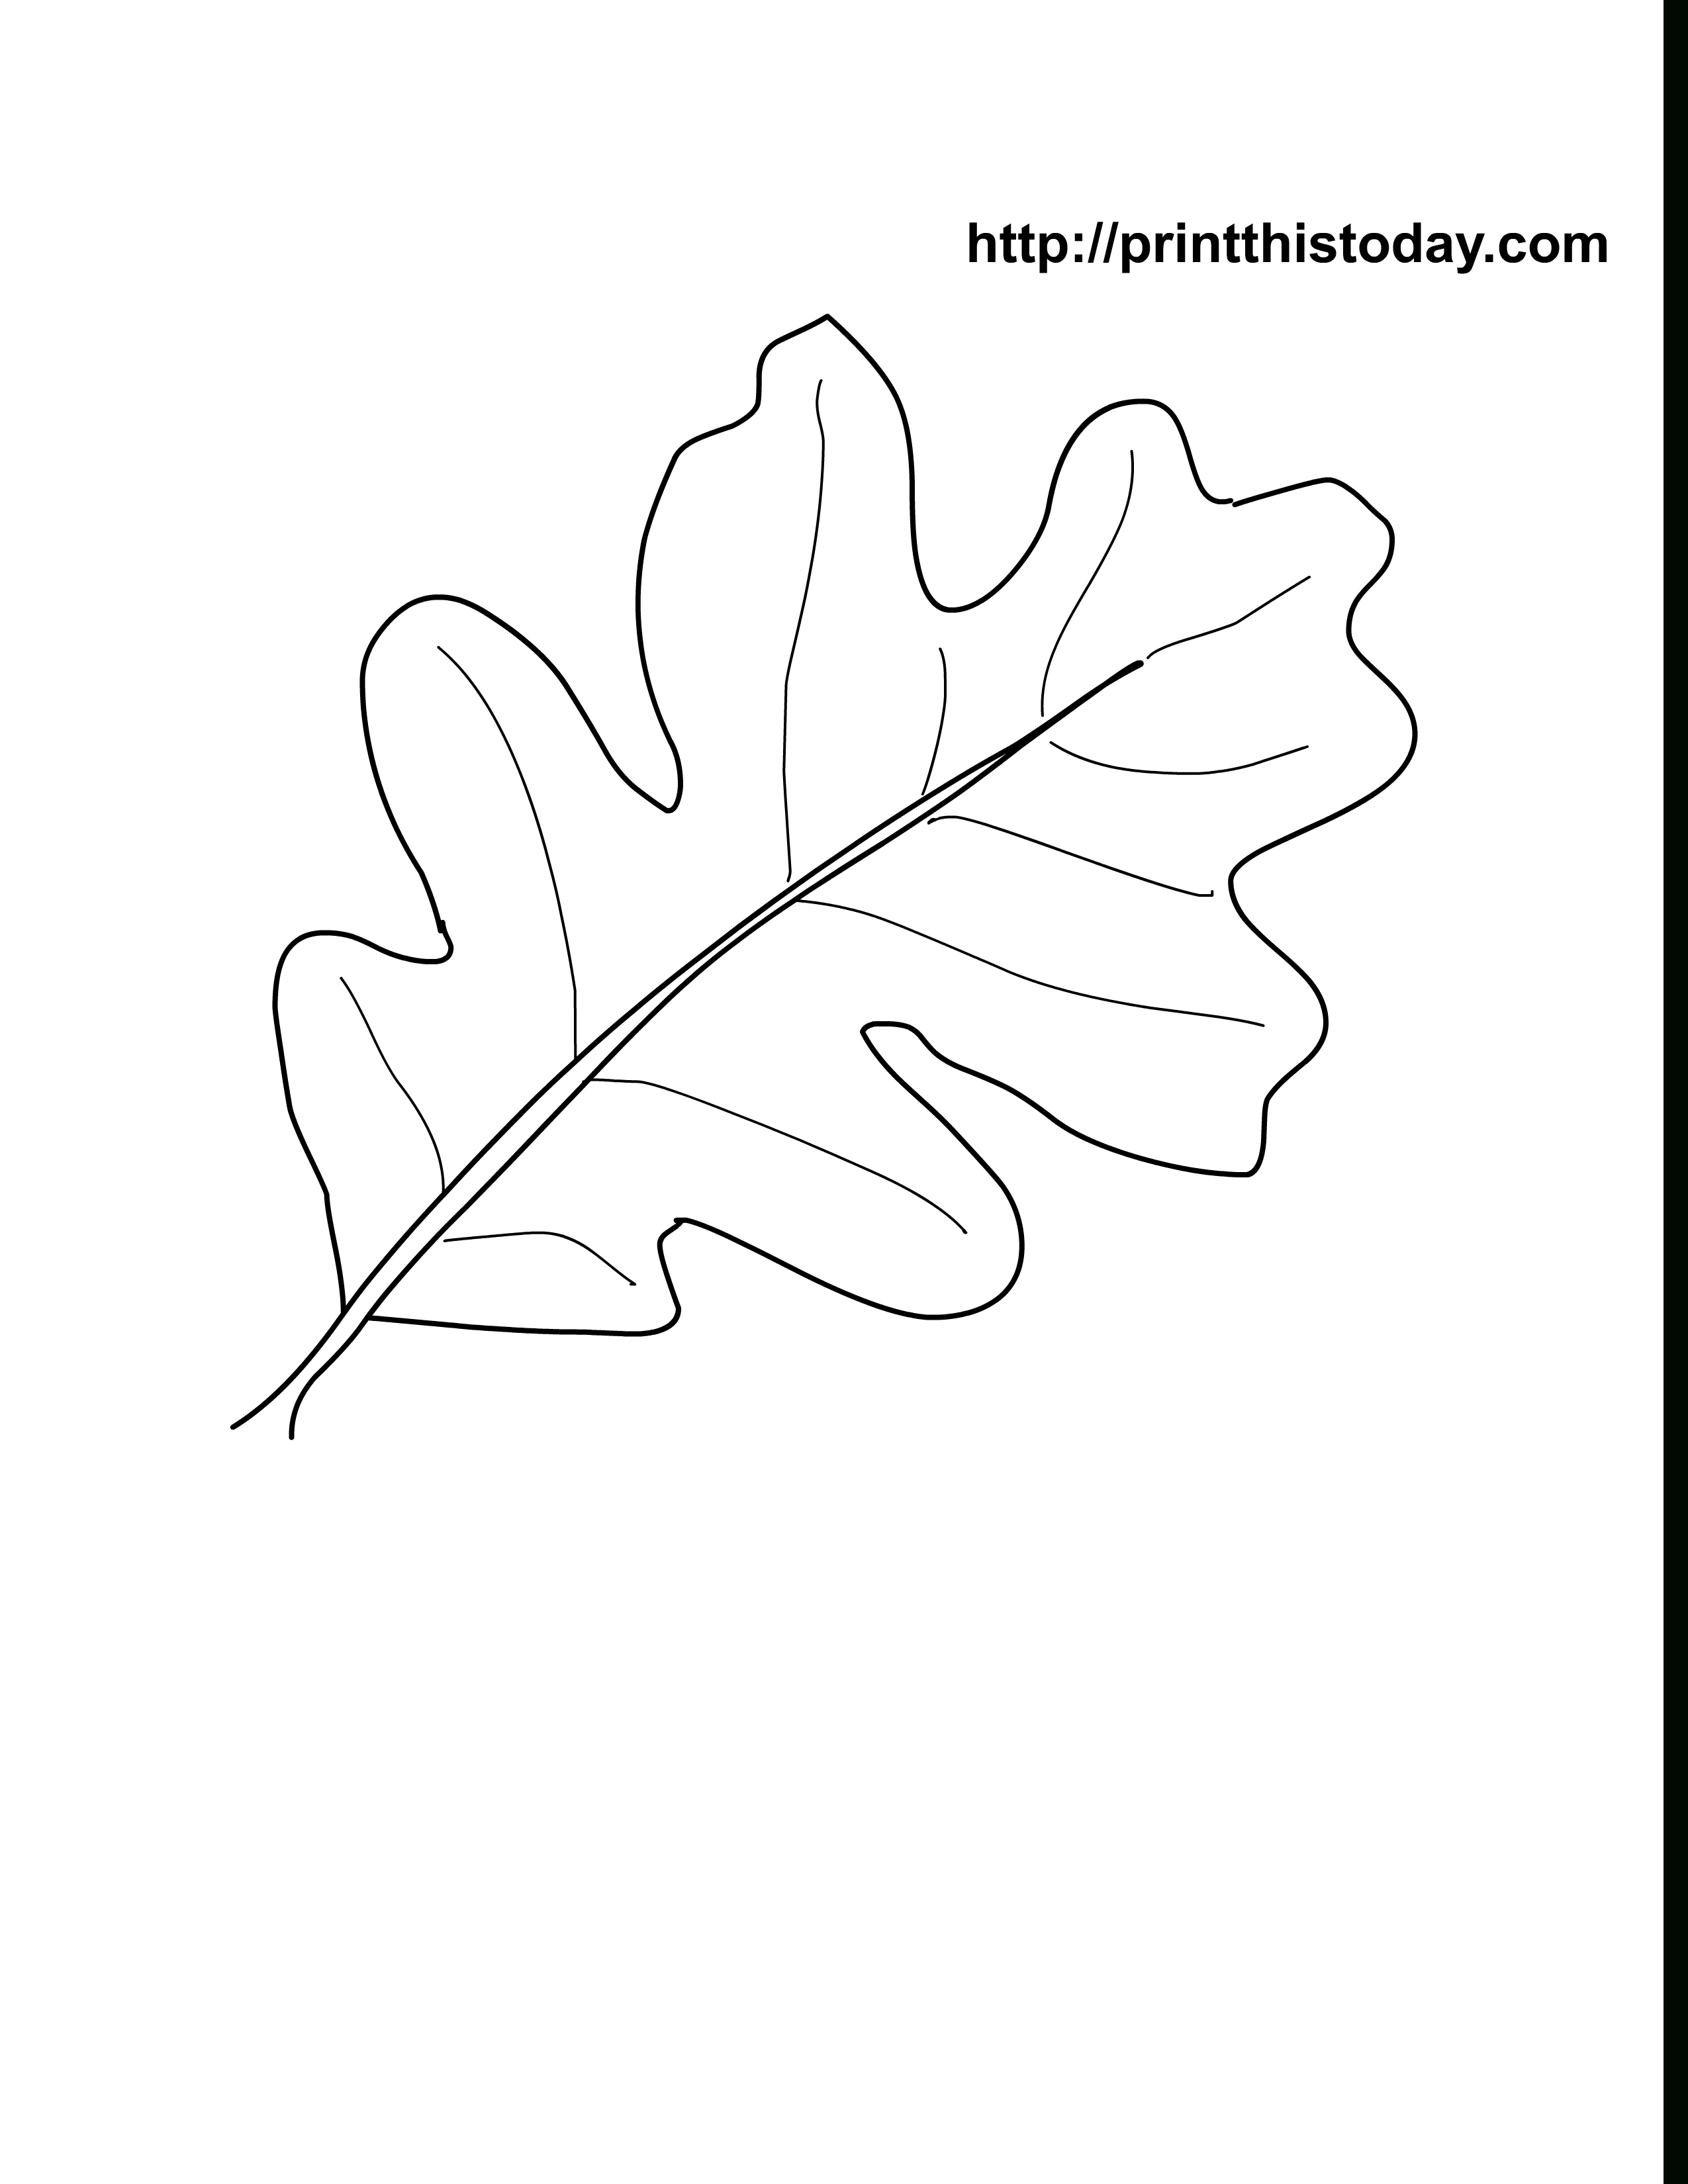 Oak Leaves Coloring Pages Printable | Craft Ideas | Leaf Coloring - Free Printable Oak Leaf Patterns